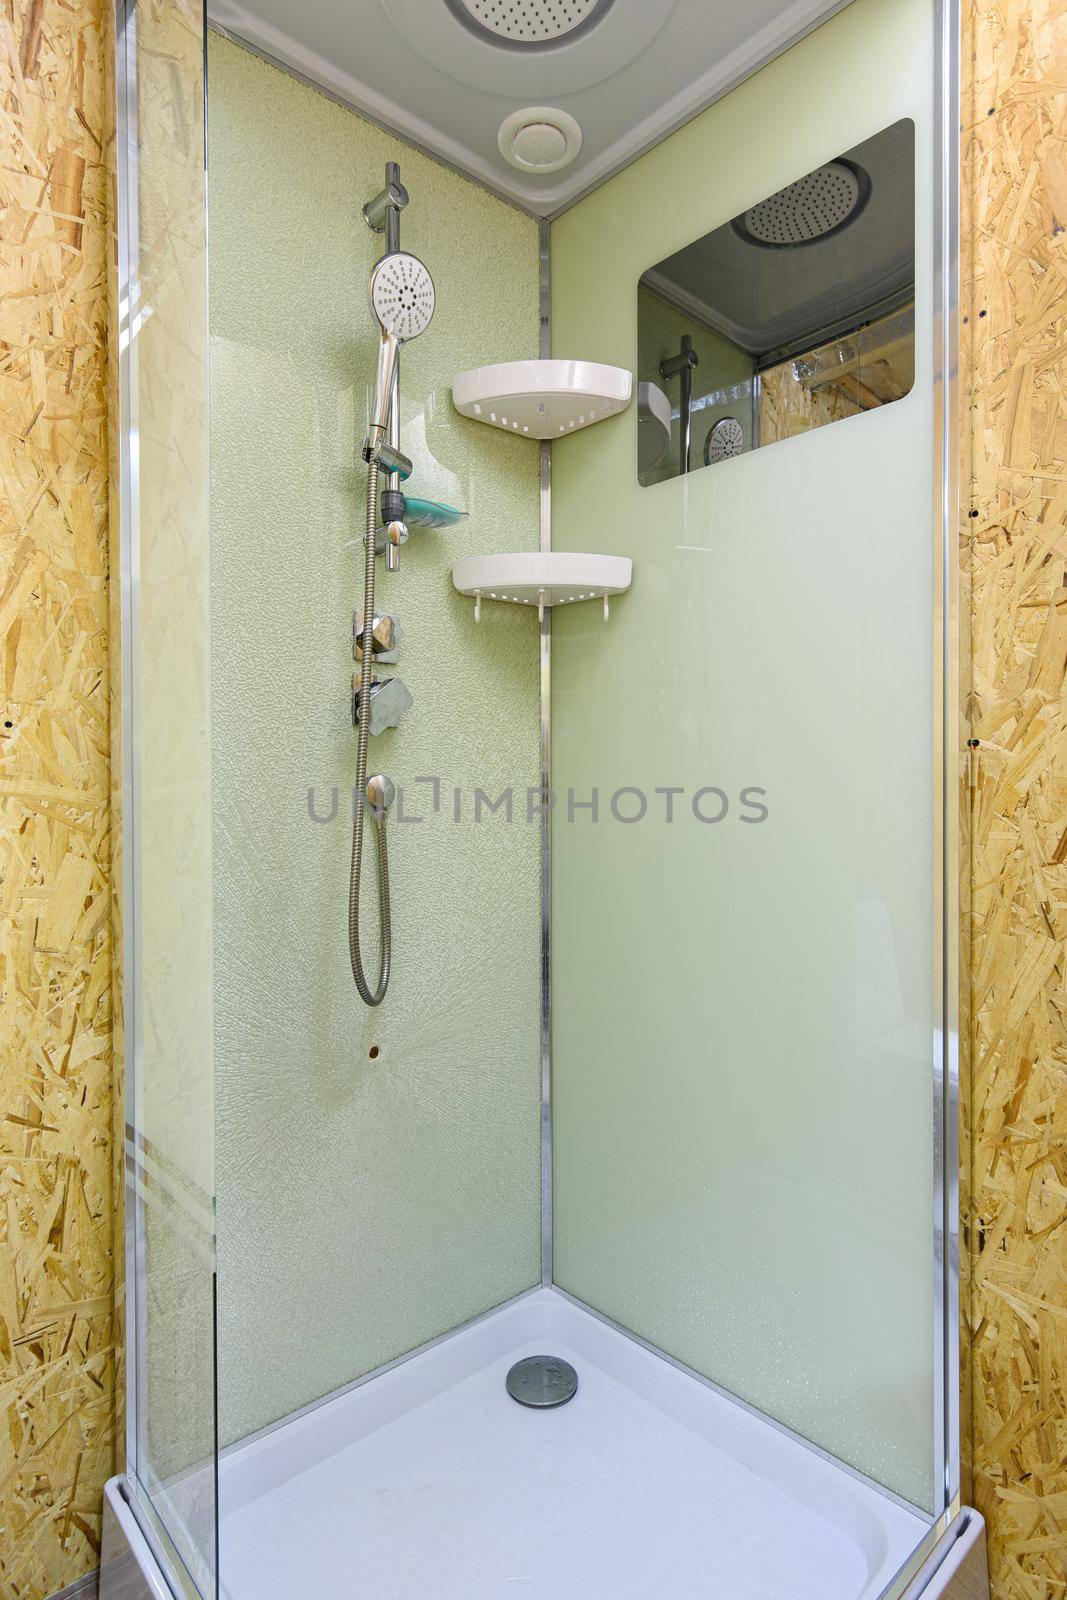 Shower stall with cracked glass, located in a country house